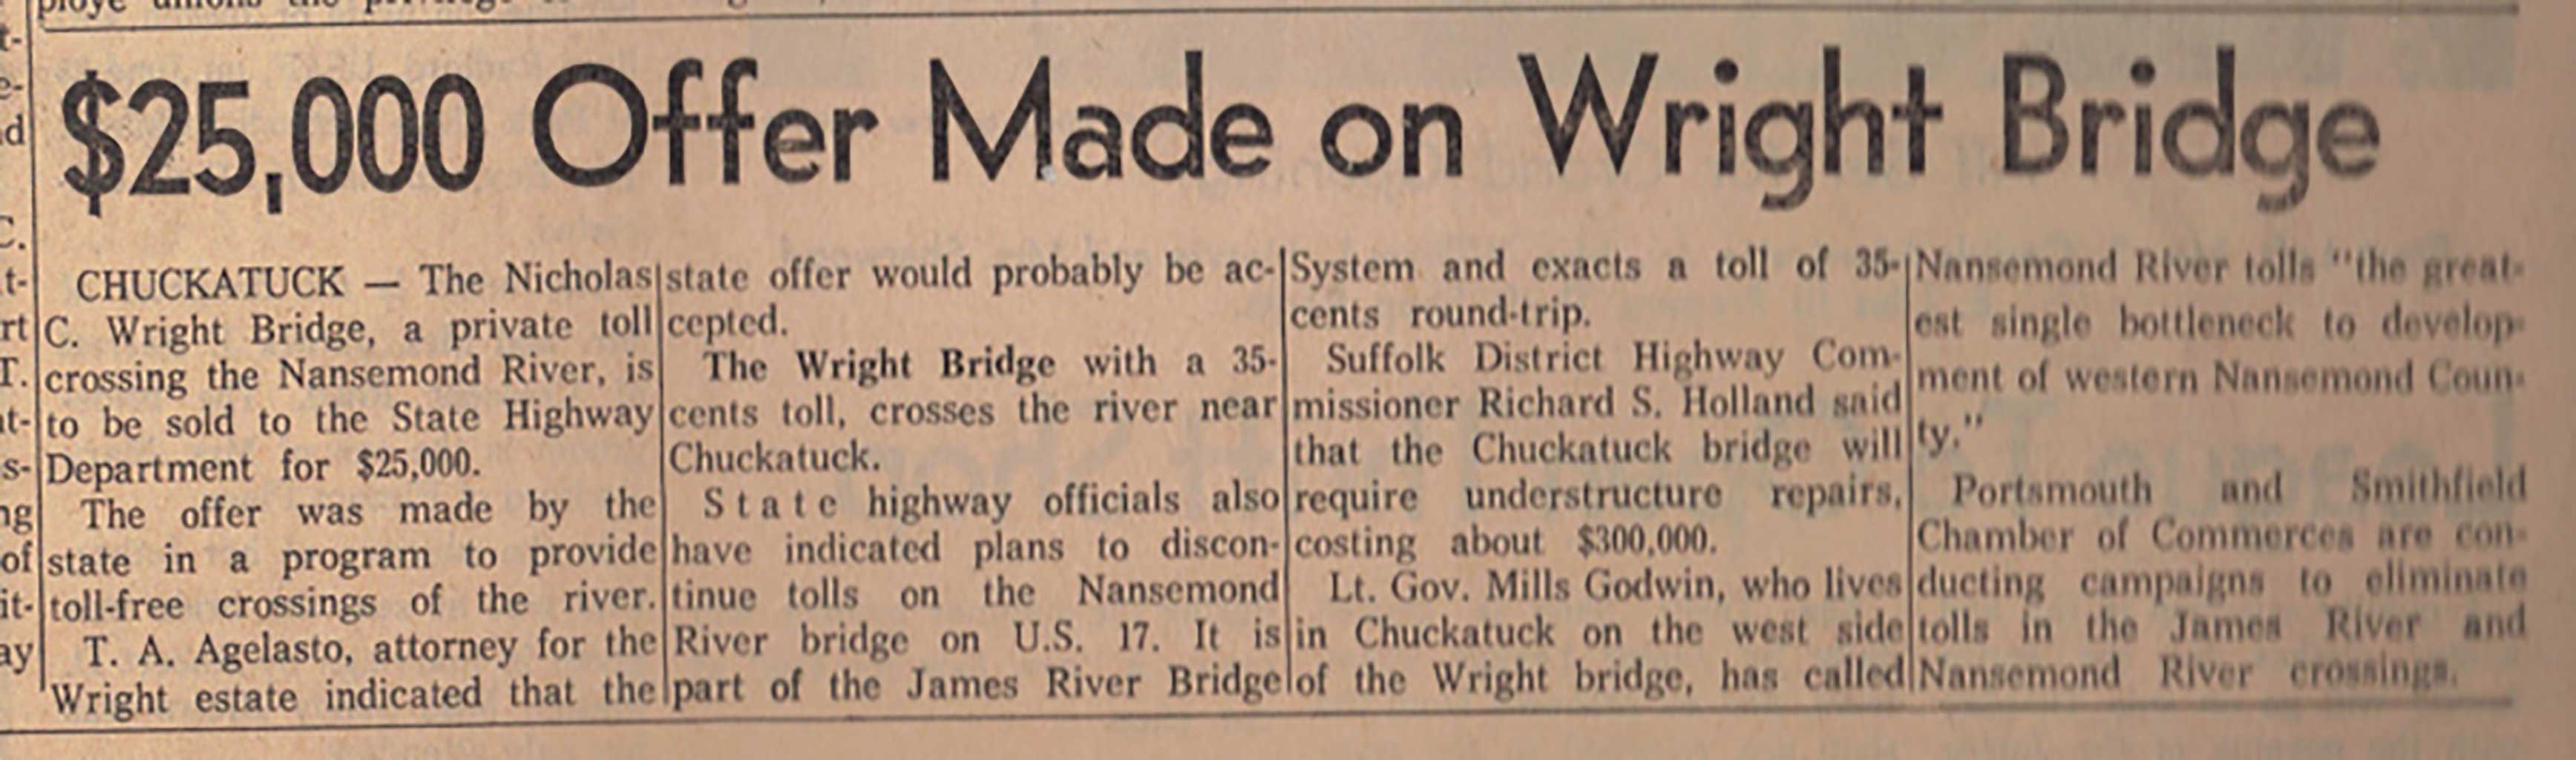 article-on-sale-of-kings-highway-bridge-wright-family